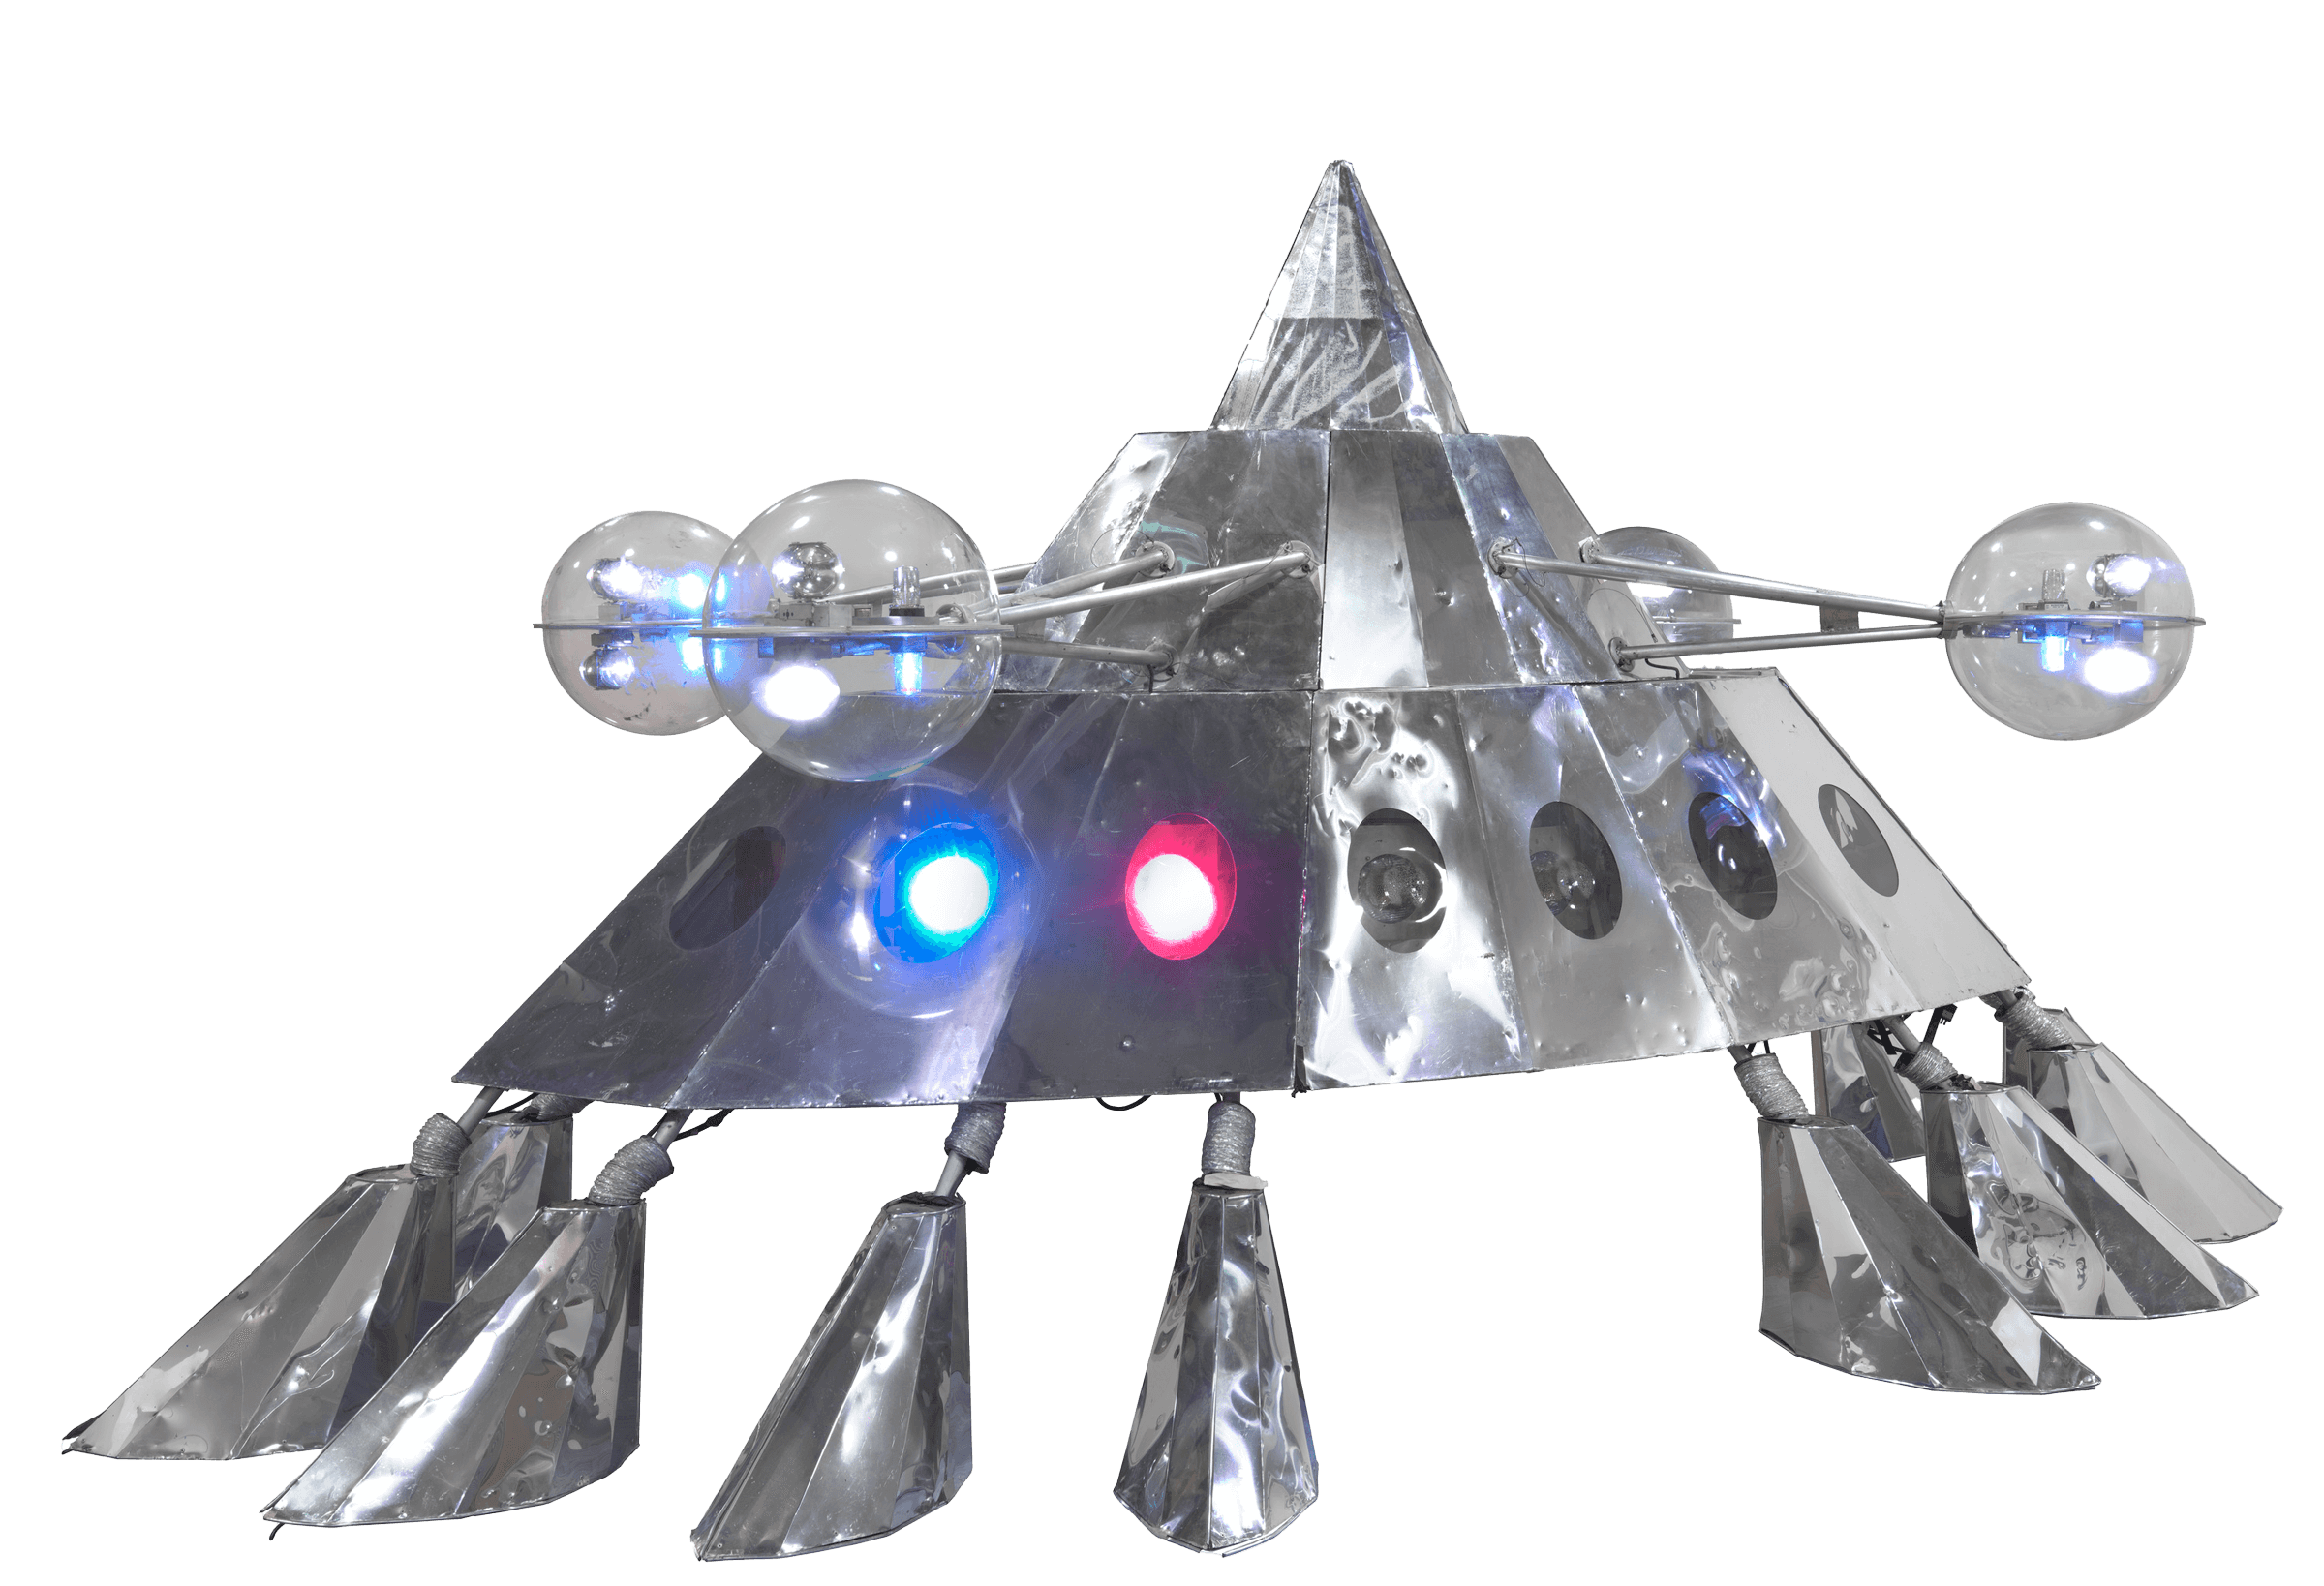 A sliver space vehicle with multiple legs and colored lights, replicating the originally Mothership.